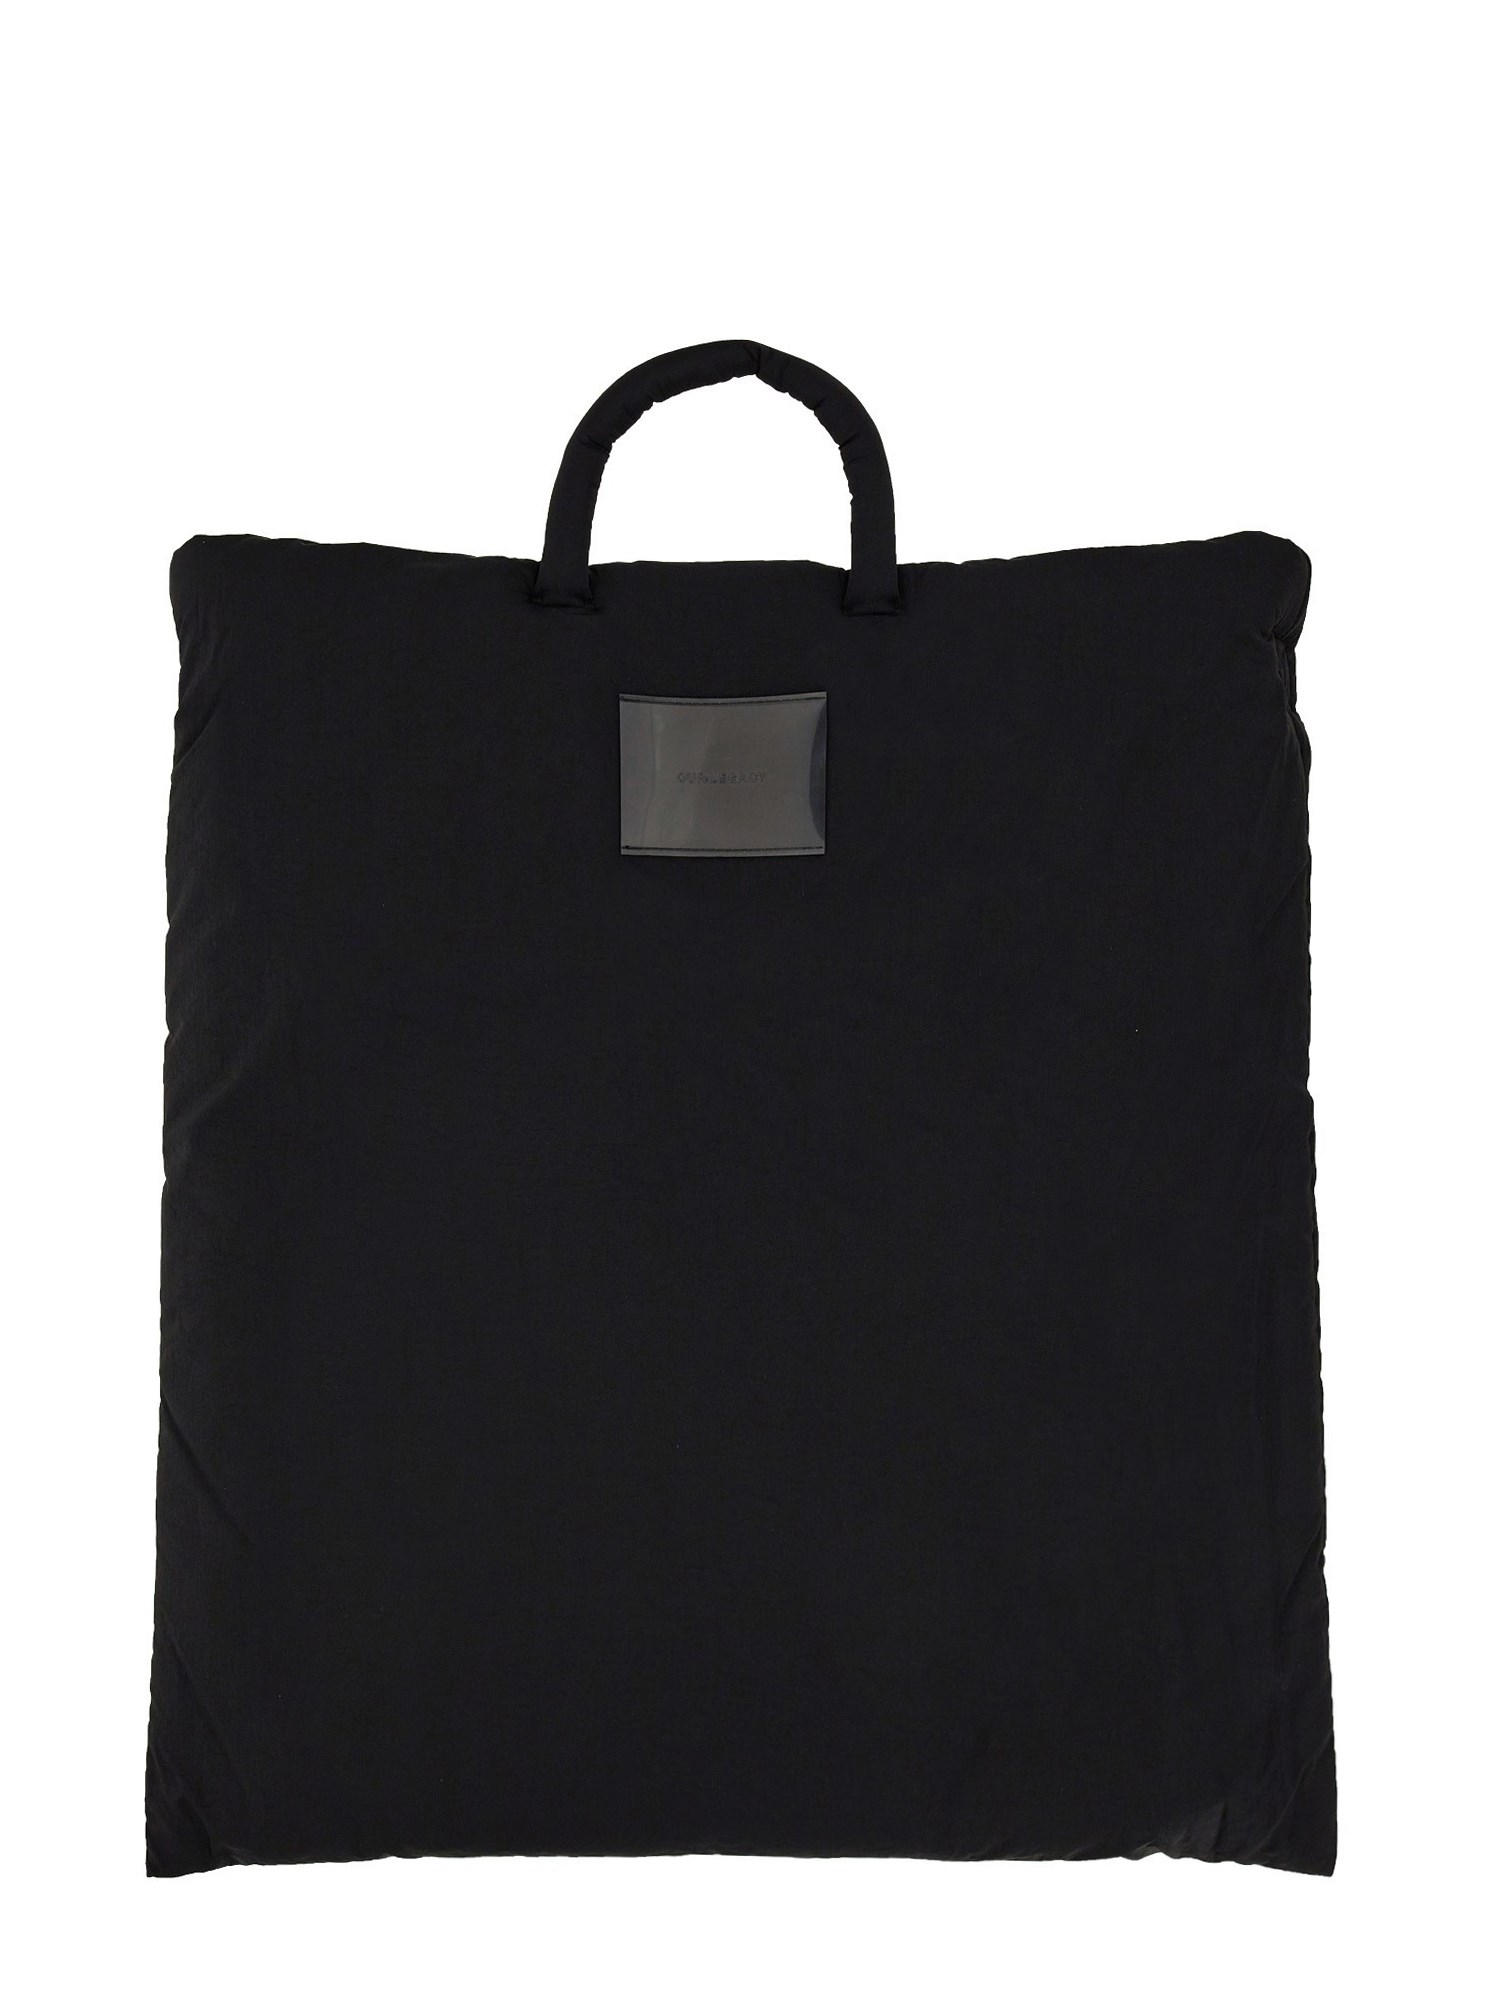 our legacy tote pillow bag